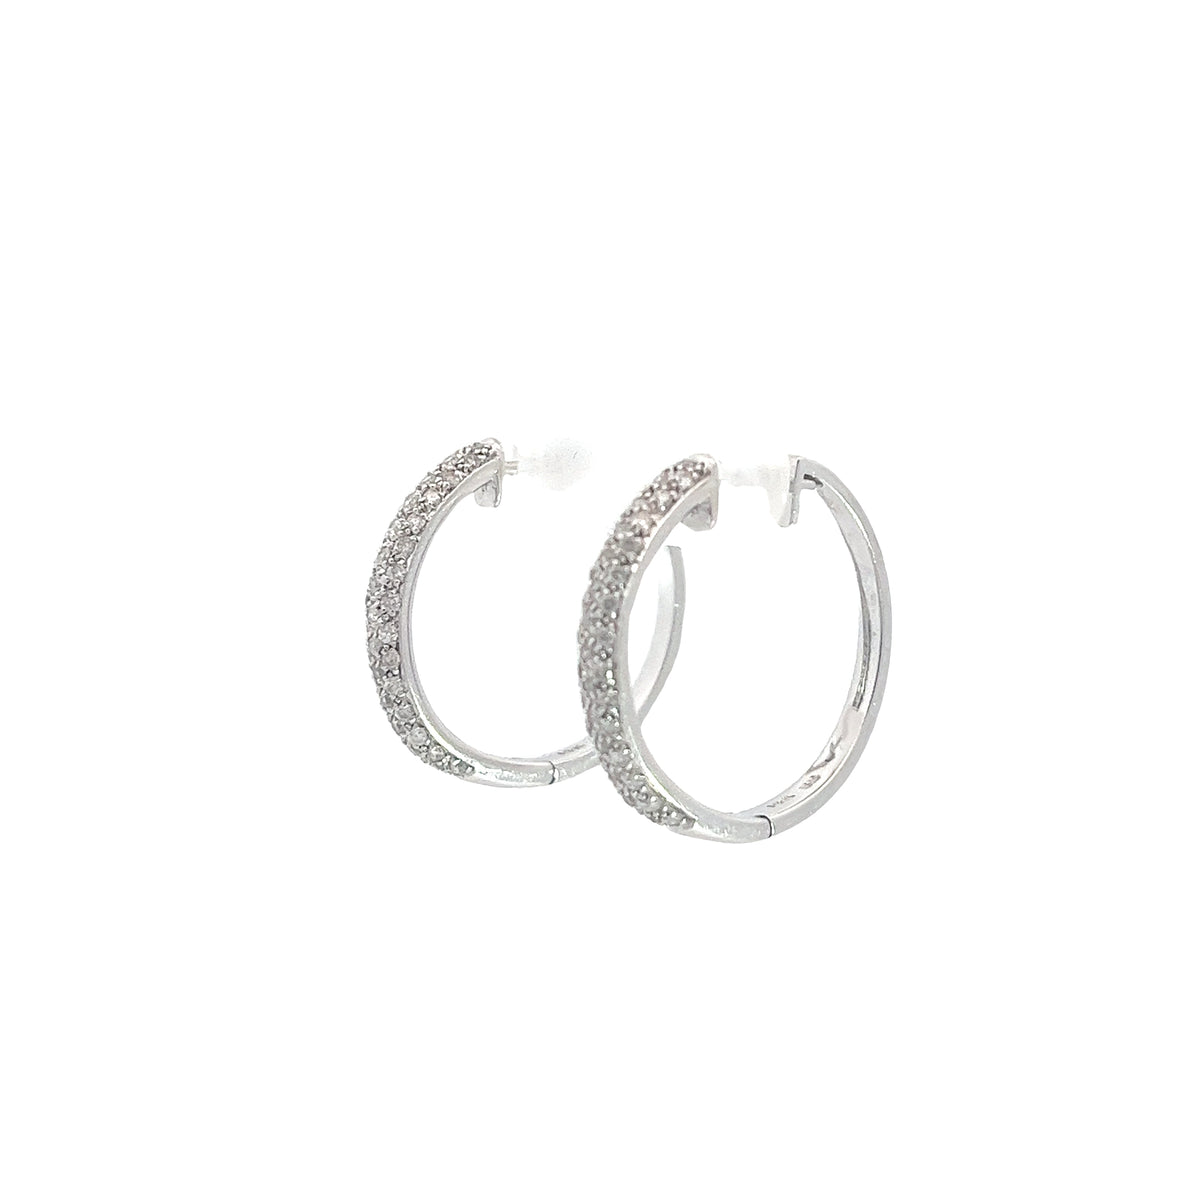 14K WHITE GOLD .50CT H SI2 PAVE 1 INCH HOOP EARRINGS